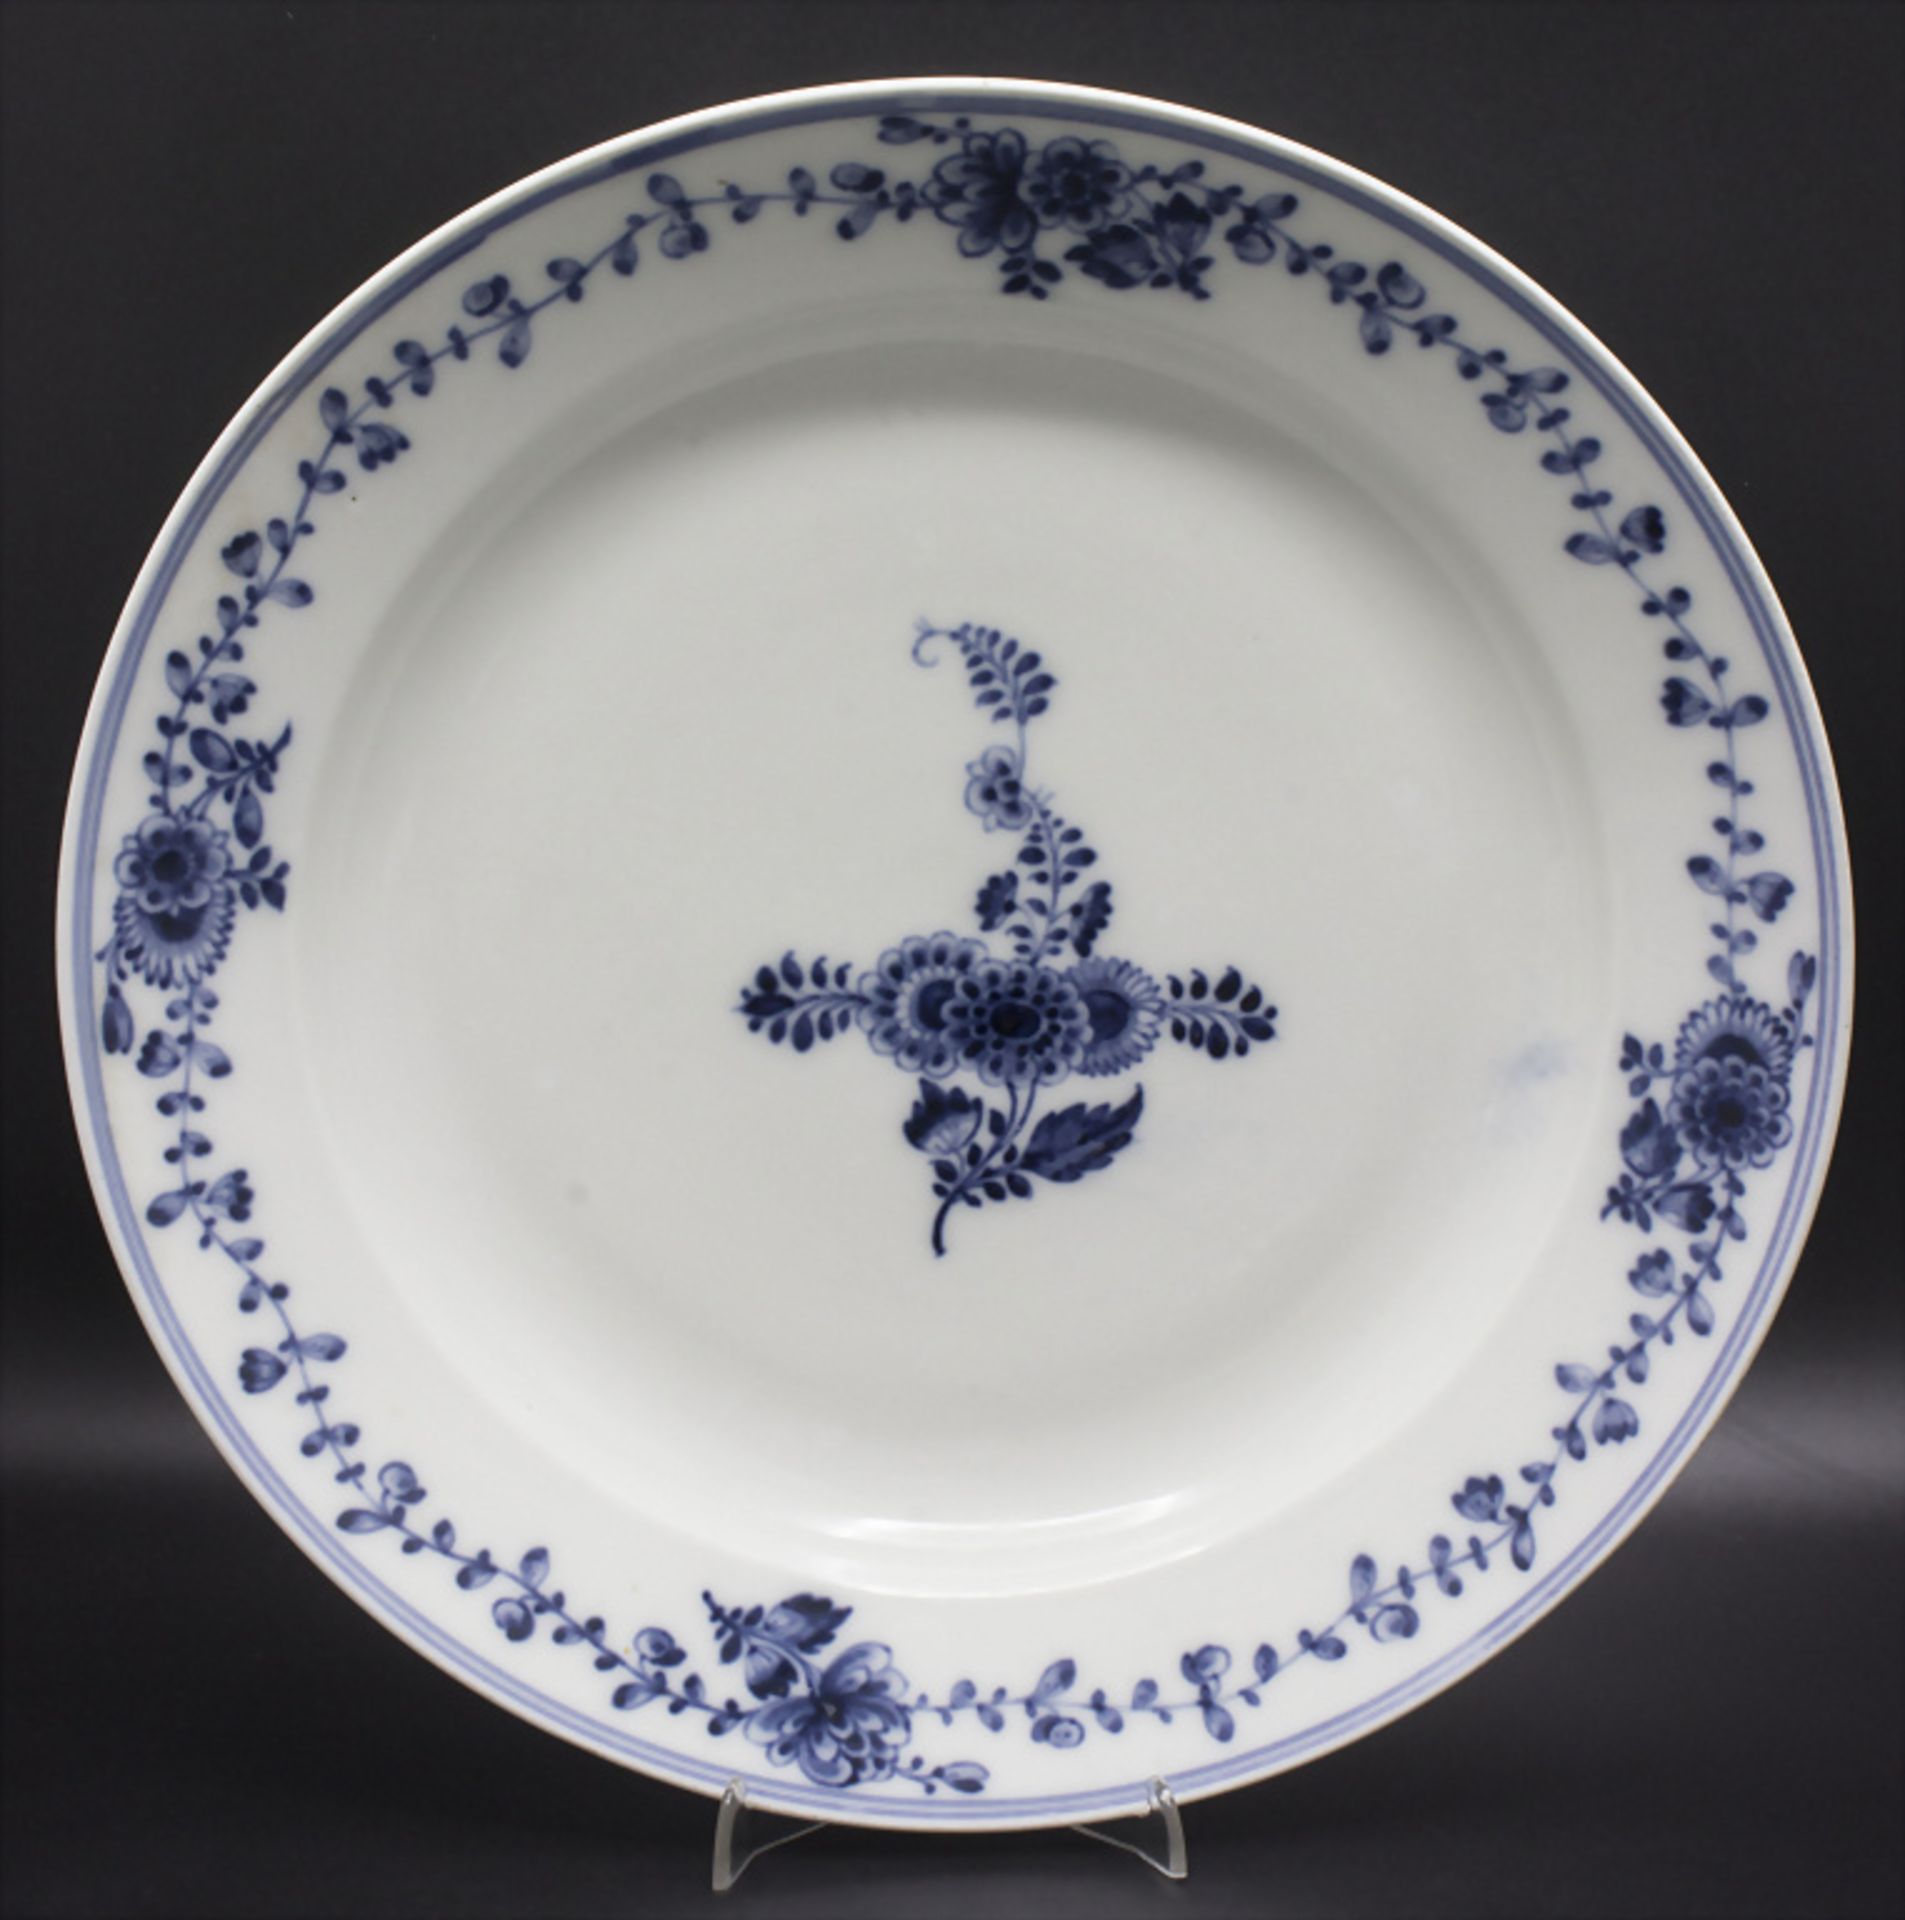 Schale 'Indisch Blau' / A bowl with 'Indian Blue' pattern, Meissen, Anfang 19. Jh.